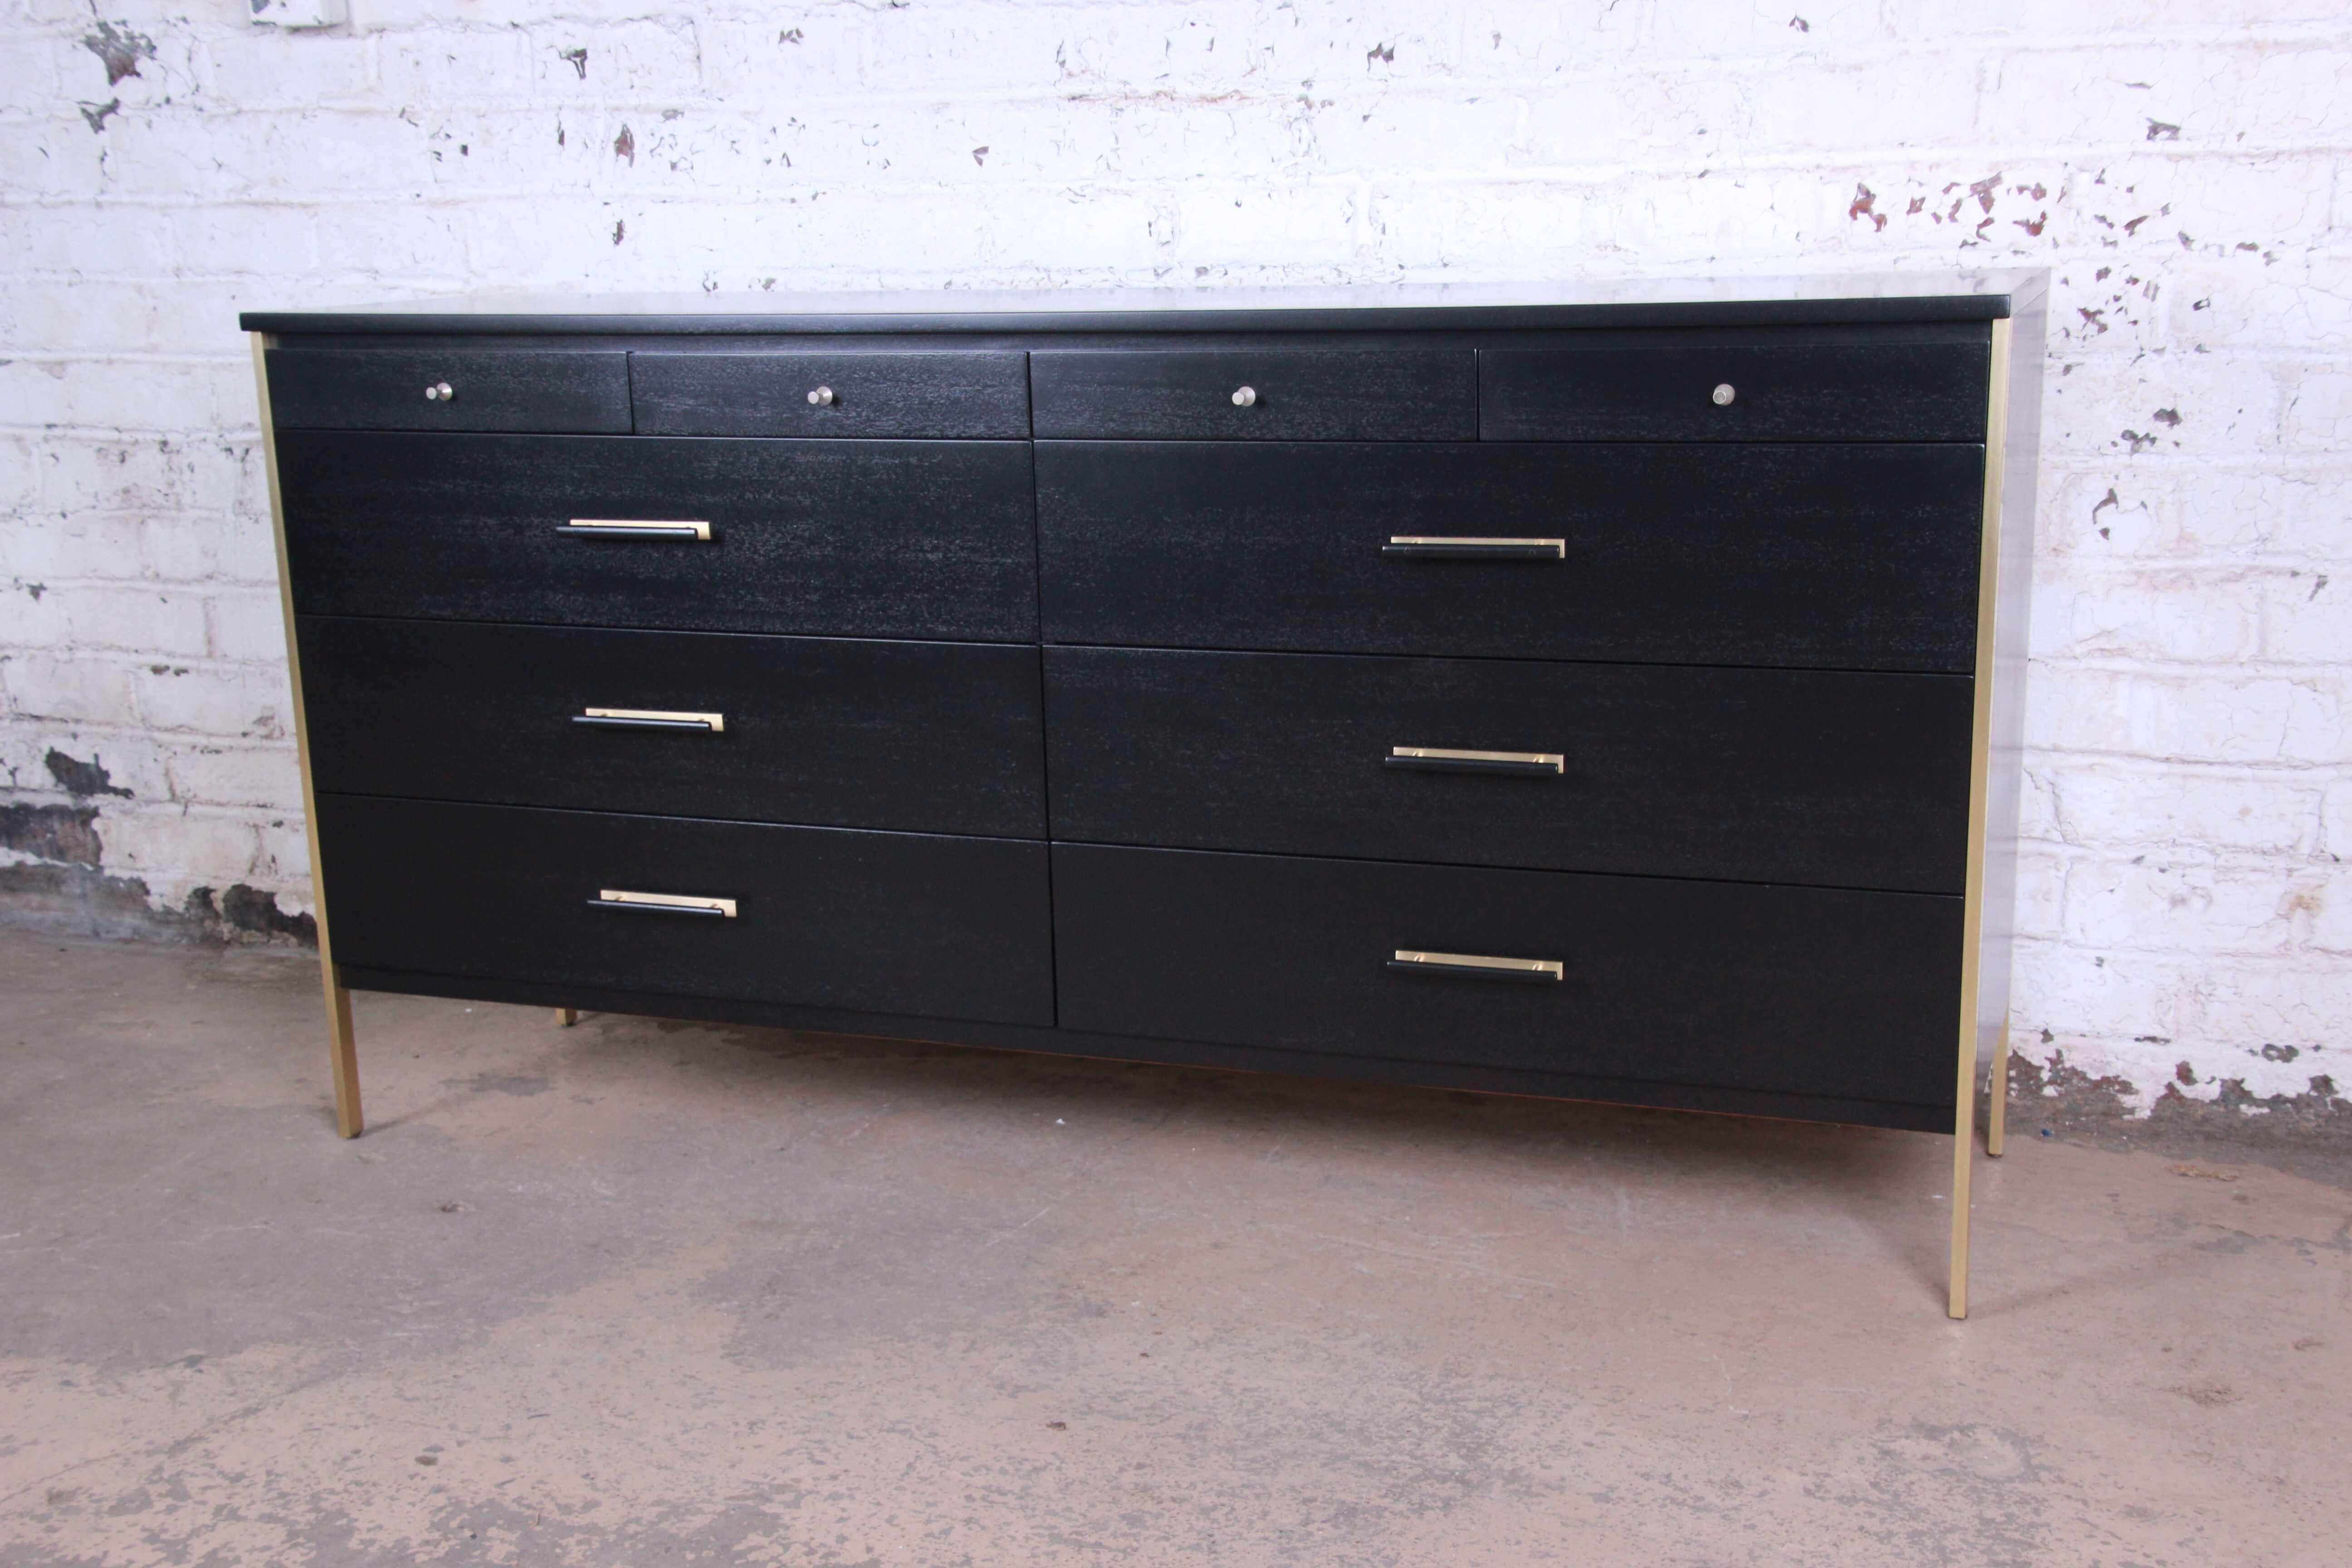 Offering a stunning ebonized Paul McCobb for Calvin Furniture ten-drawer long dresser. The dresser distinguished brass legs and accents offering ample room for storage. The top of the dresser offers four smaller drawers for storage and organization